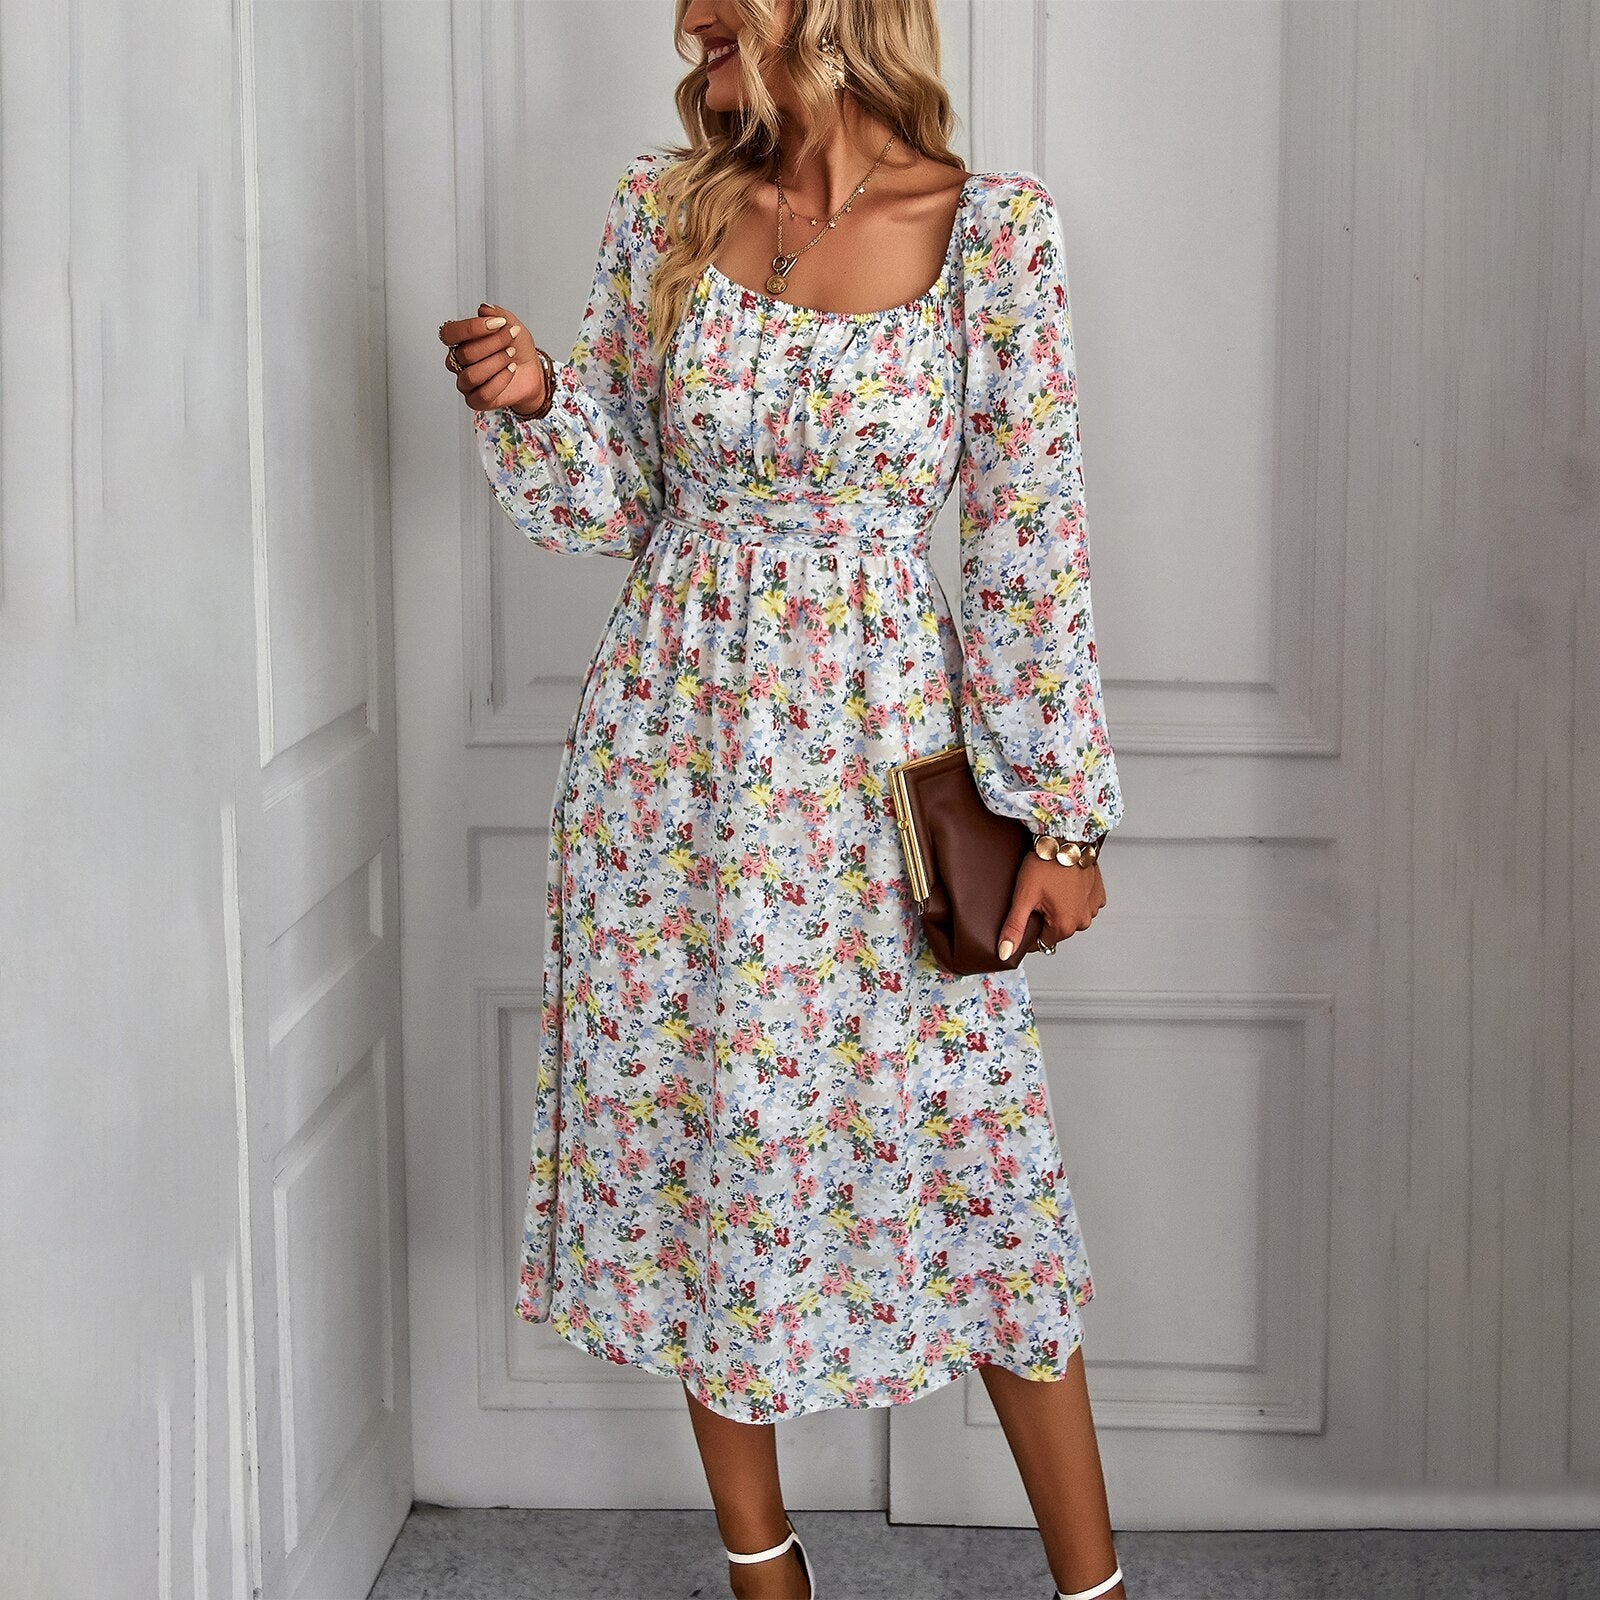 Mojoyce New Women Spring Summer Square Neck Long Sleeve Floral High Waist Dress For Ladies Fashion All Match Chic Dresses